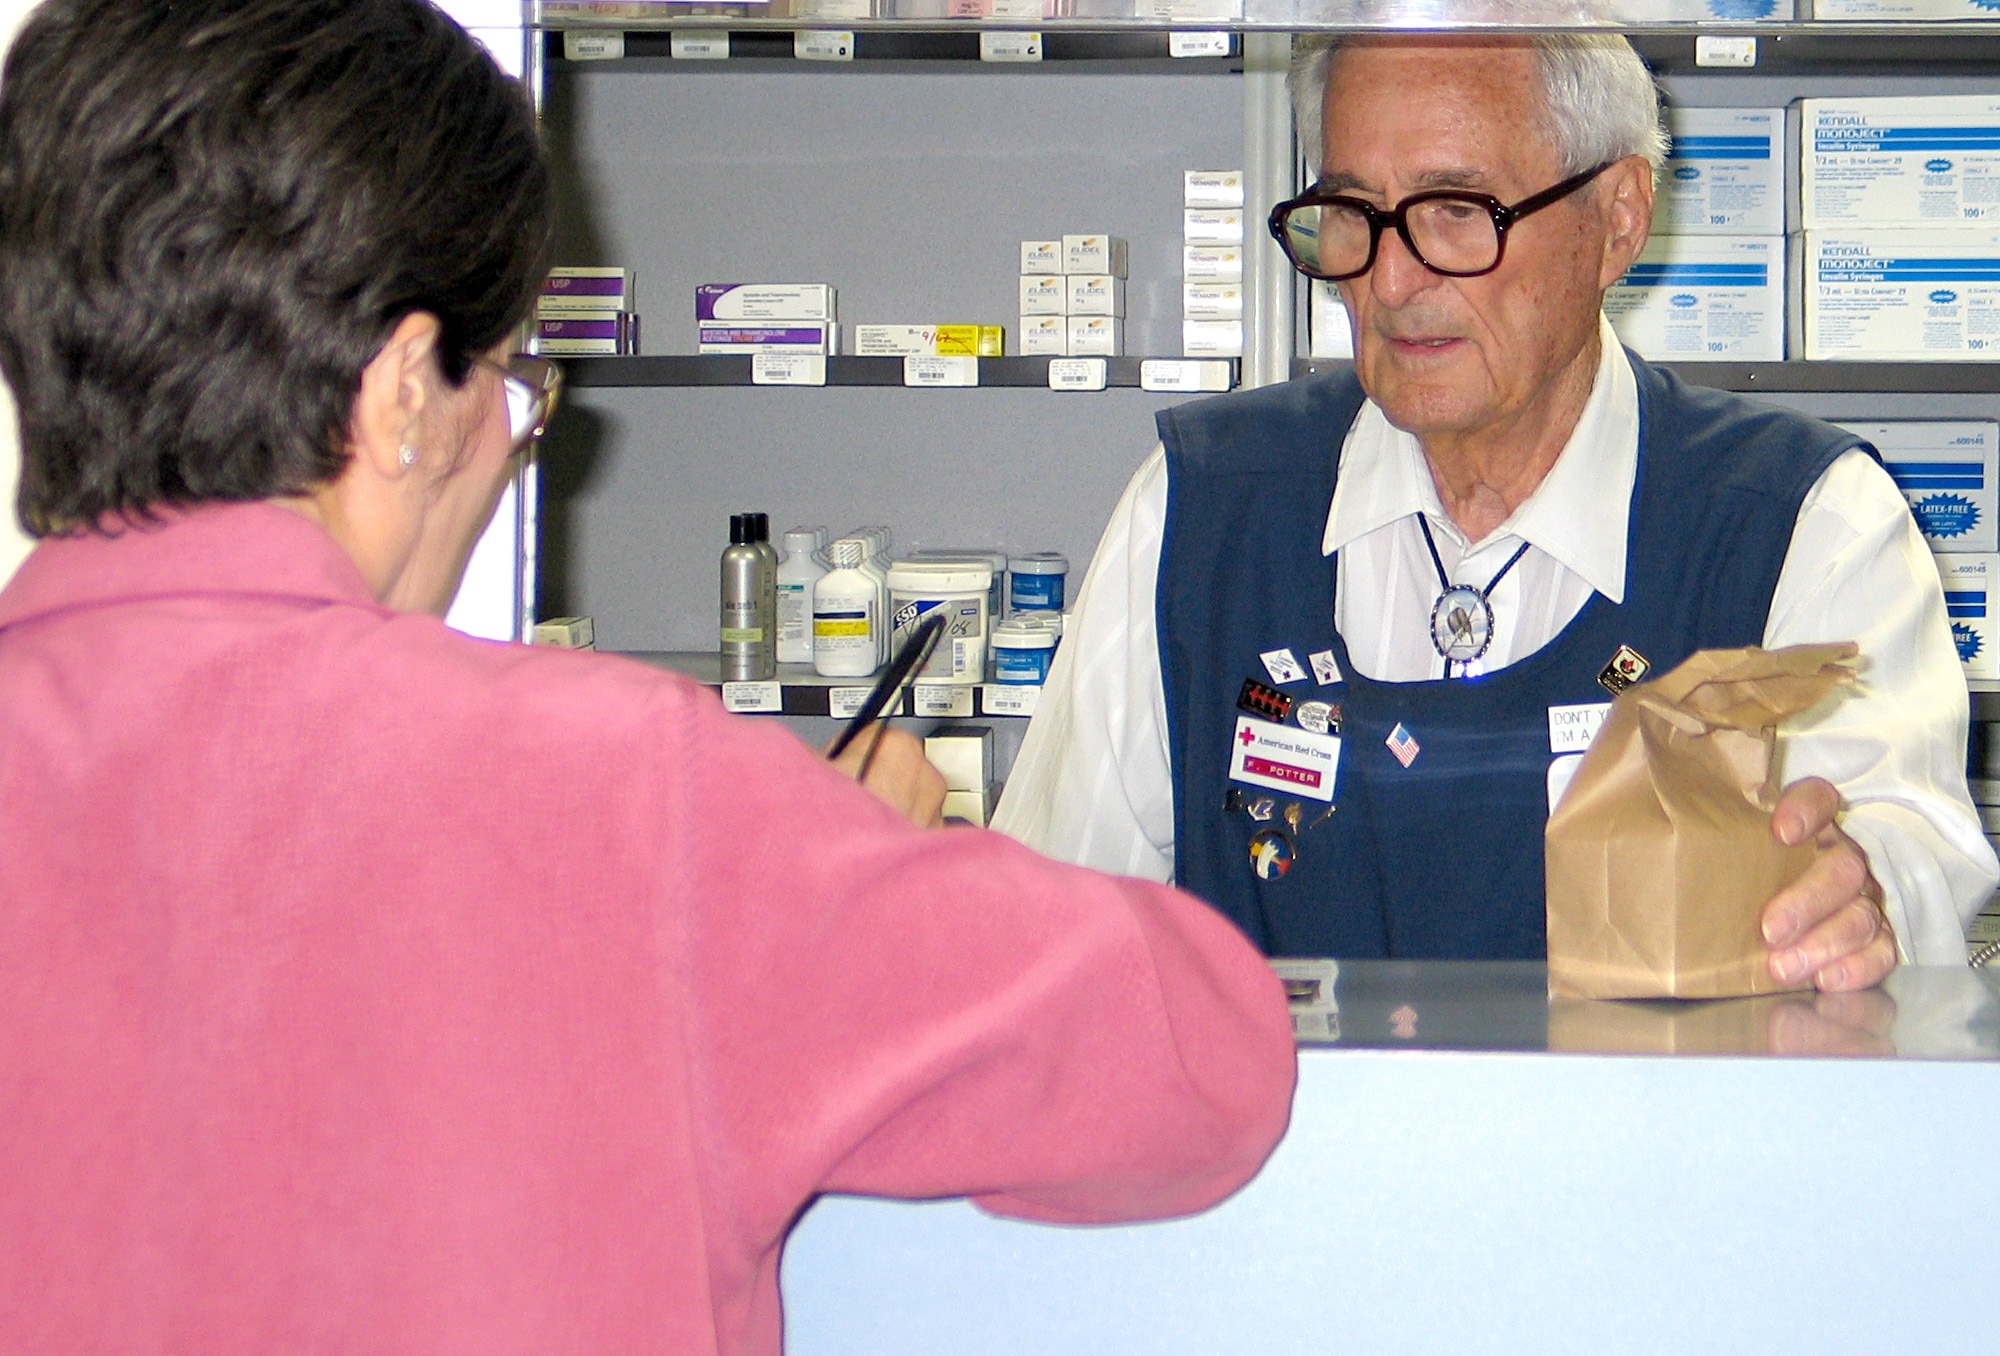 FAIRCHILD AIR FORCE BASE, Wash. -- Retired Col. Francis Potter refills a prescription at the refill pharmacy here May 2. Colonel Potter has volunteered at the Fairchild pharmacy for the past 24 years, and served in the Air Force from 1943-1969. “I like to keep in touch with the people,” said Colonel Potter when asked why he volunteers. “I like to remain a part of the military.” (U.S. Air Force photo/Staff Sgt. Connie L. Bias) 